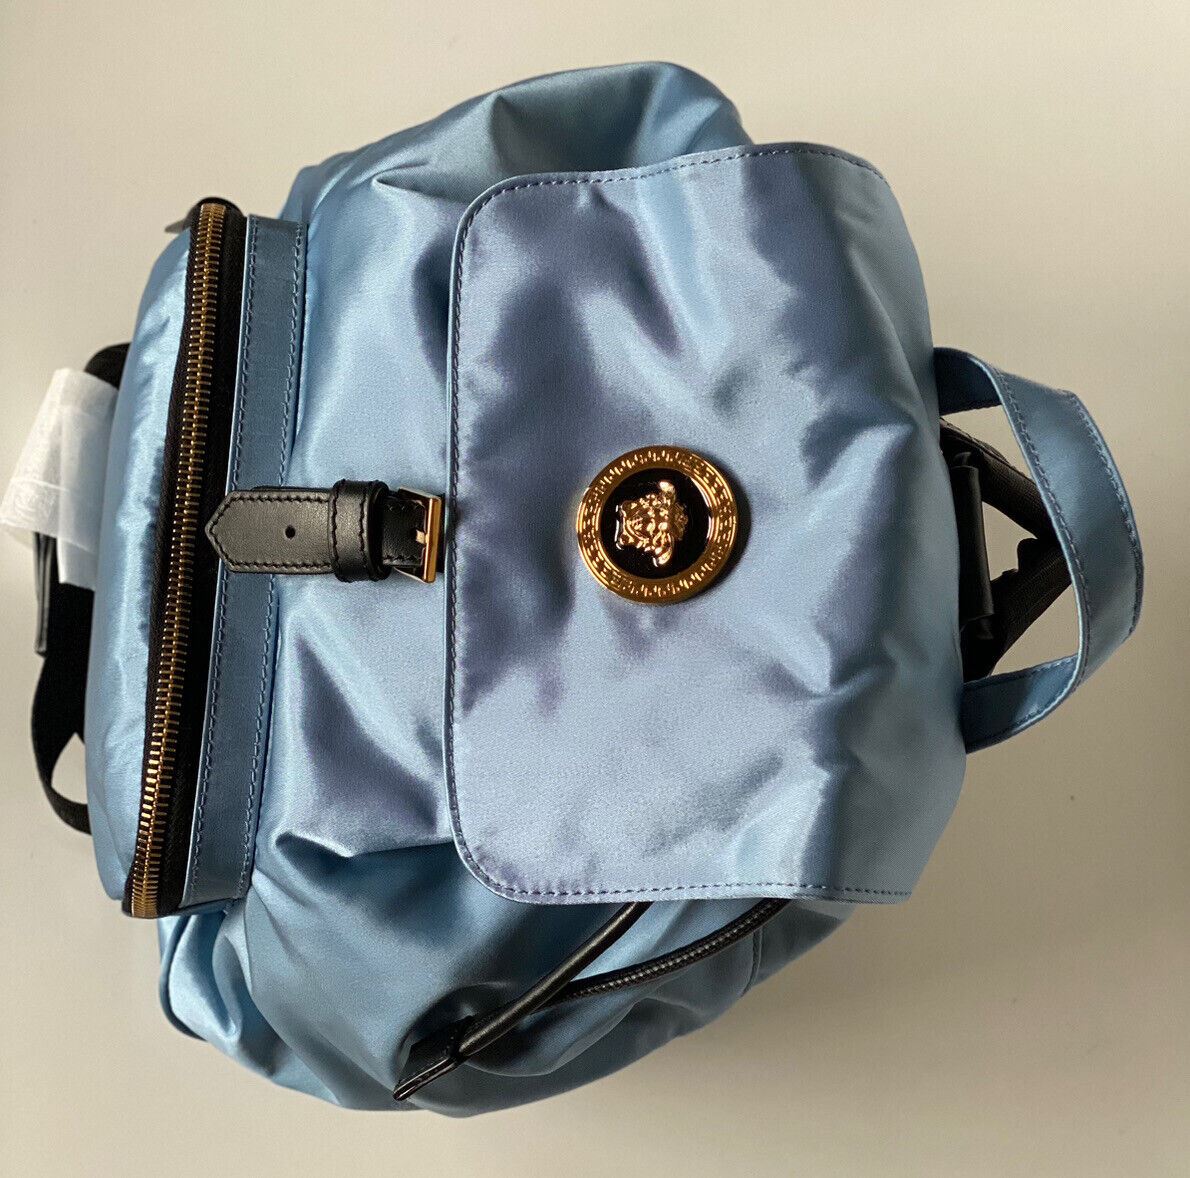 NWT Versace Nylon/Leather Cornflower Blue Backpack Made in Italy 1002876 1A02155